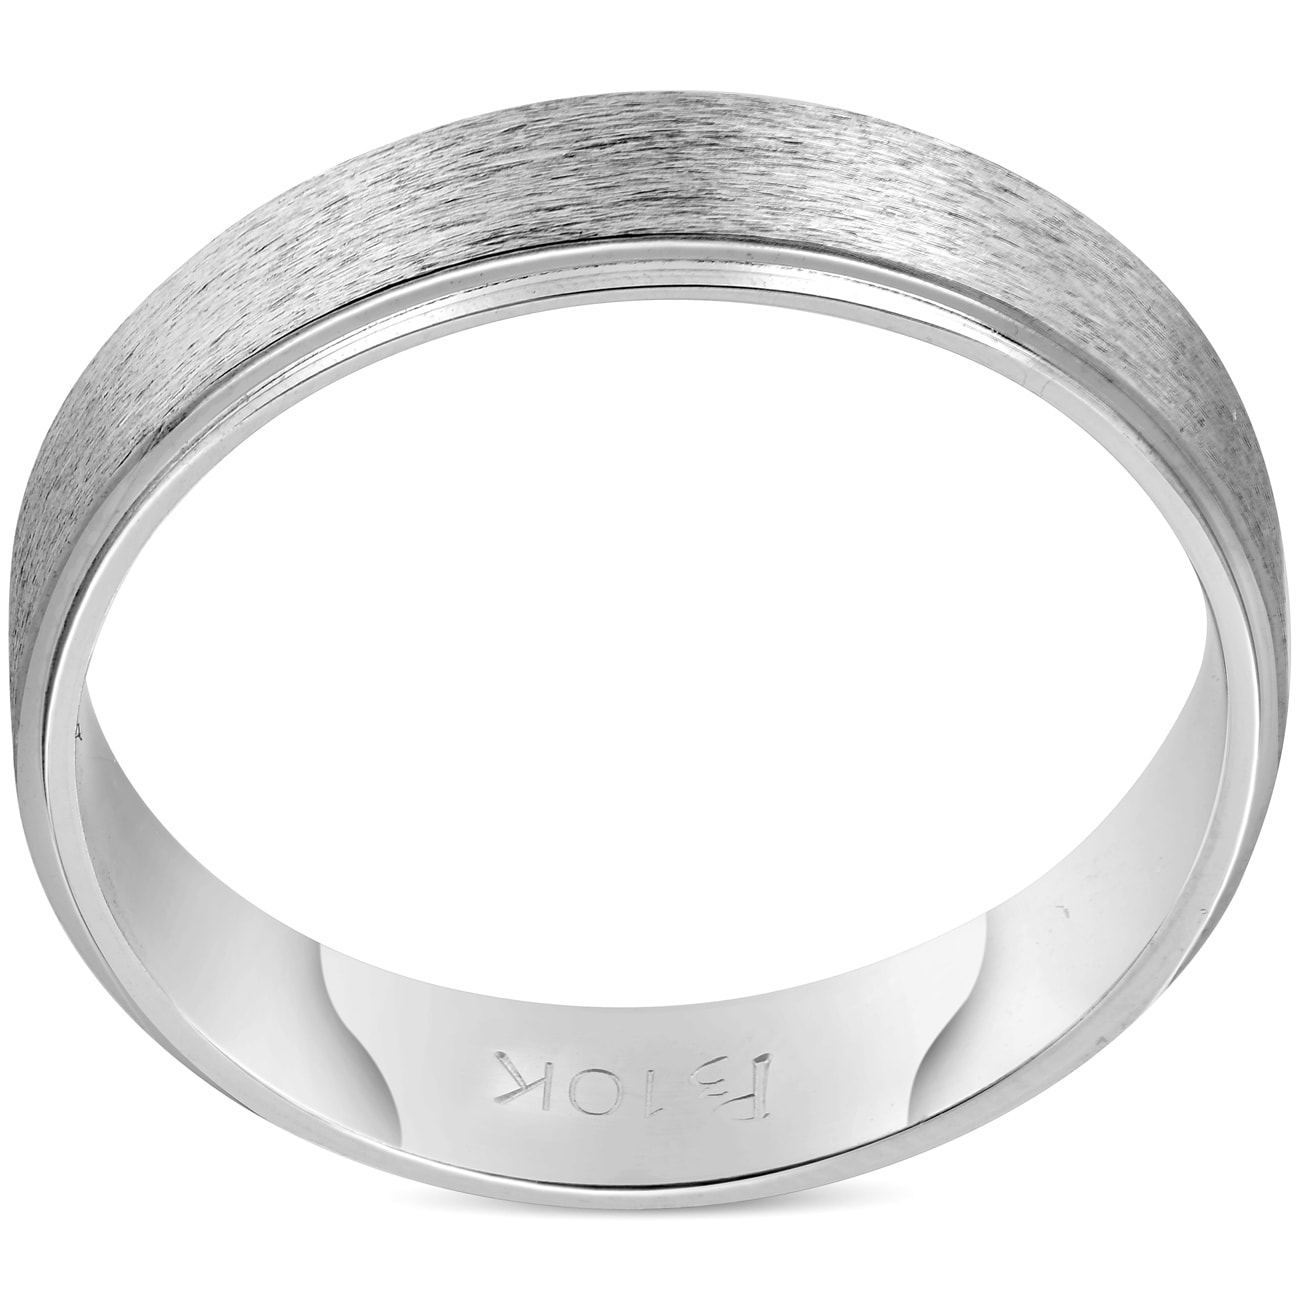 Size 7 Flat Comfort-Fit Wedding Band Ring in 10k White Gold 